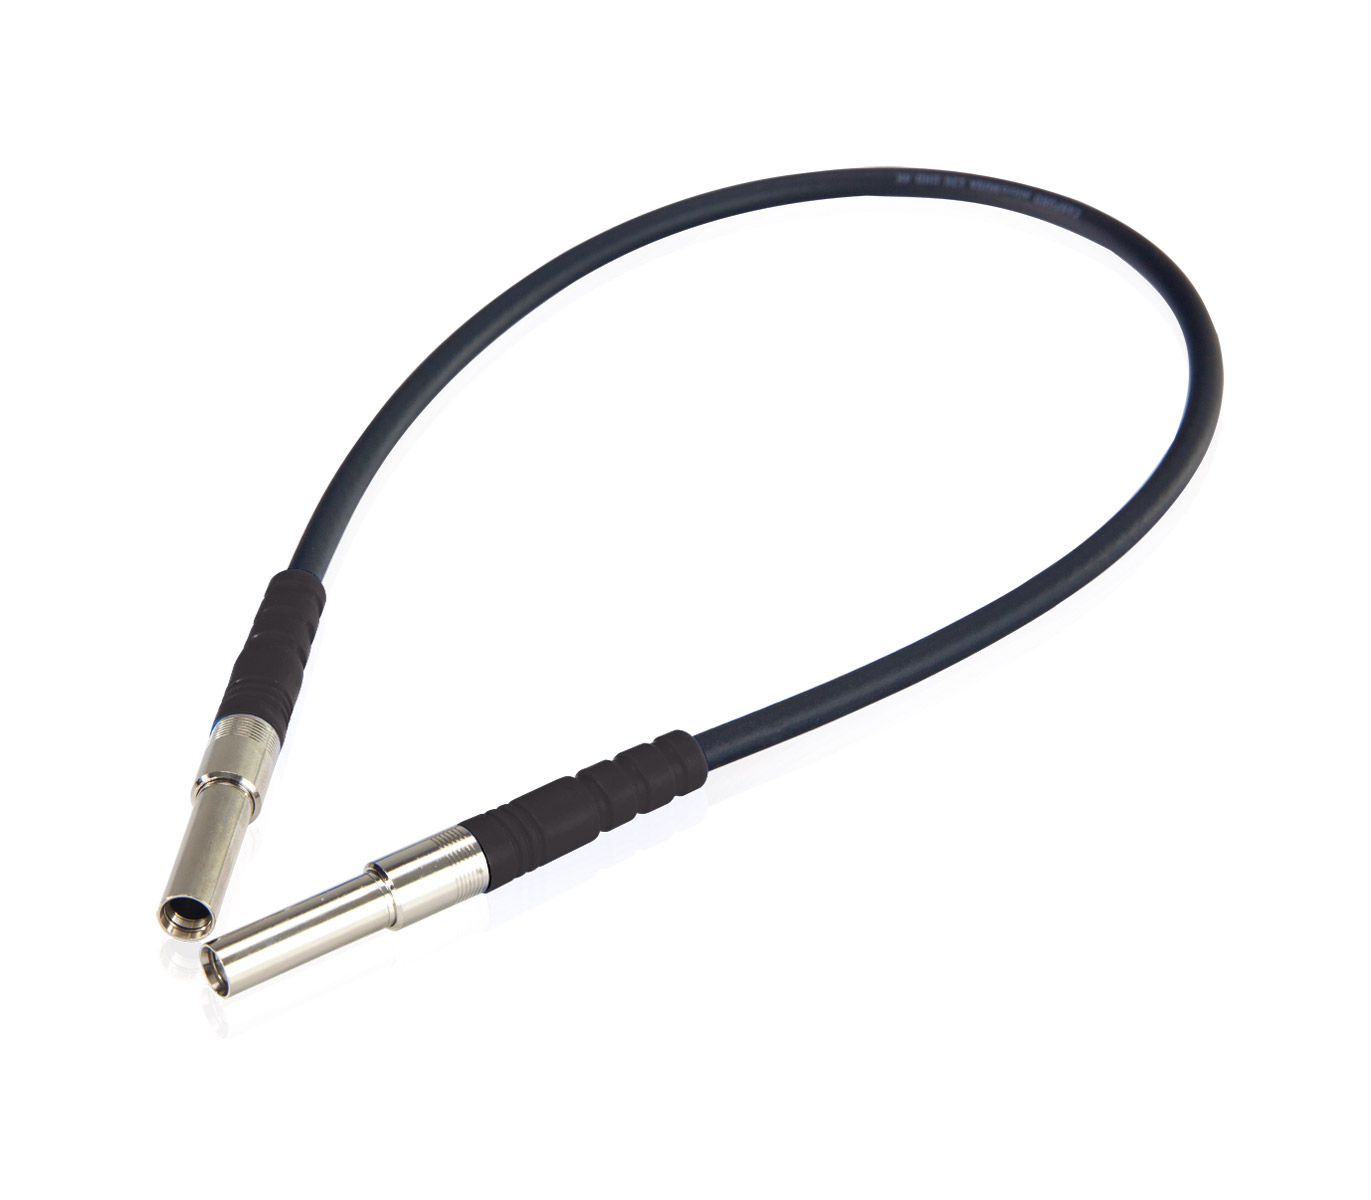 Canford microMUSA PATCHCORDS